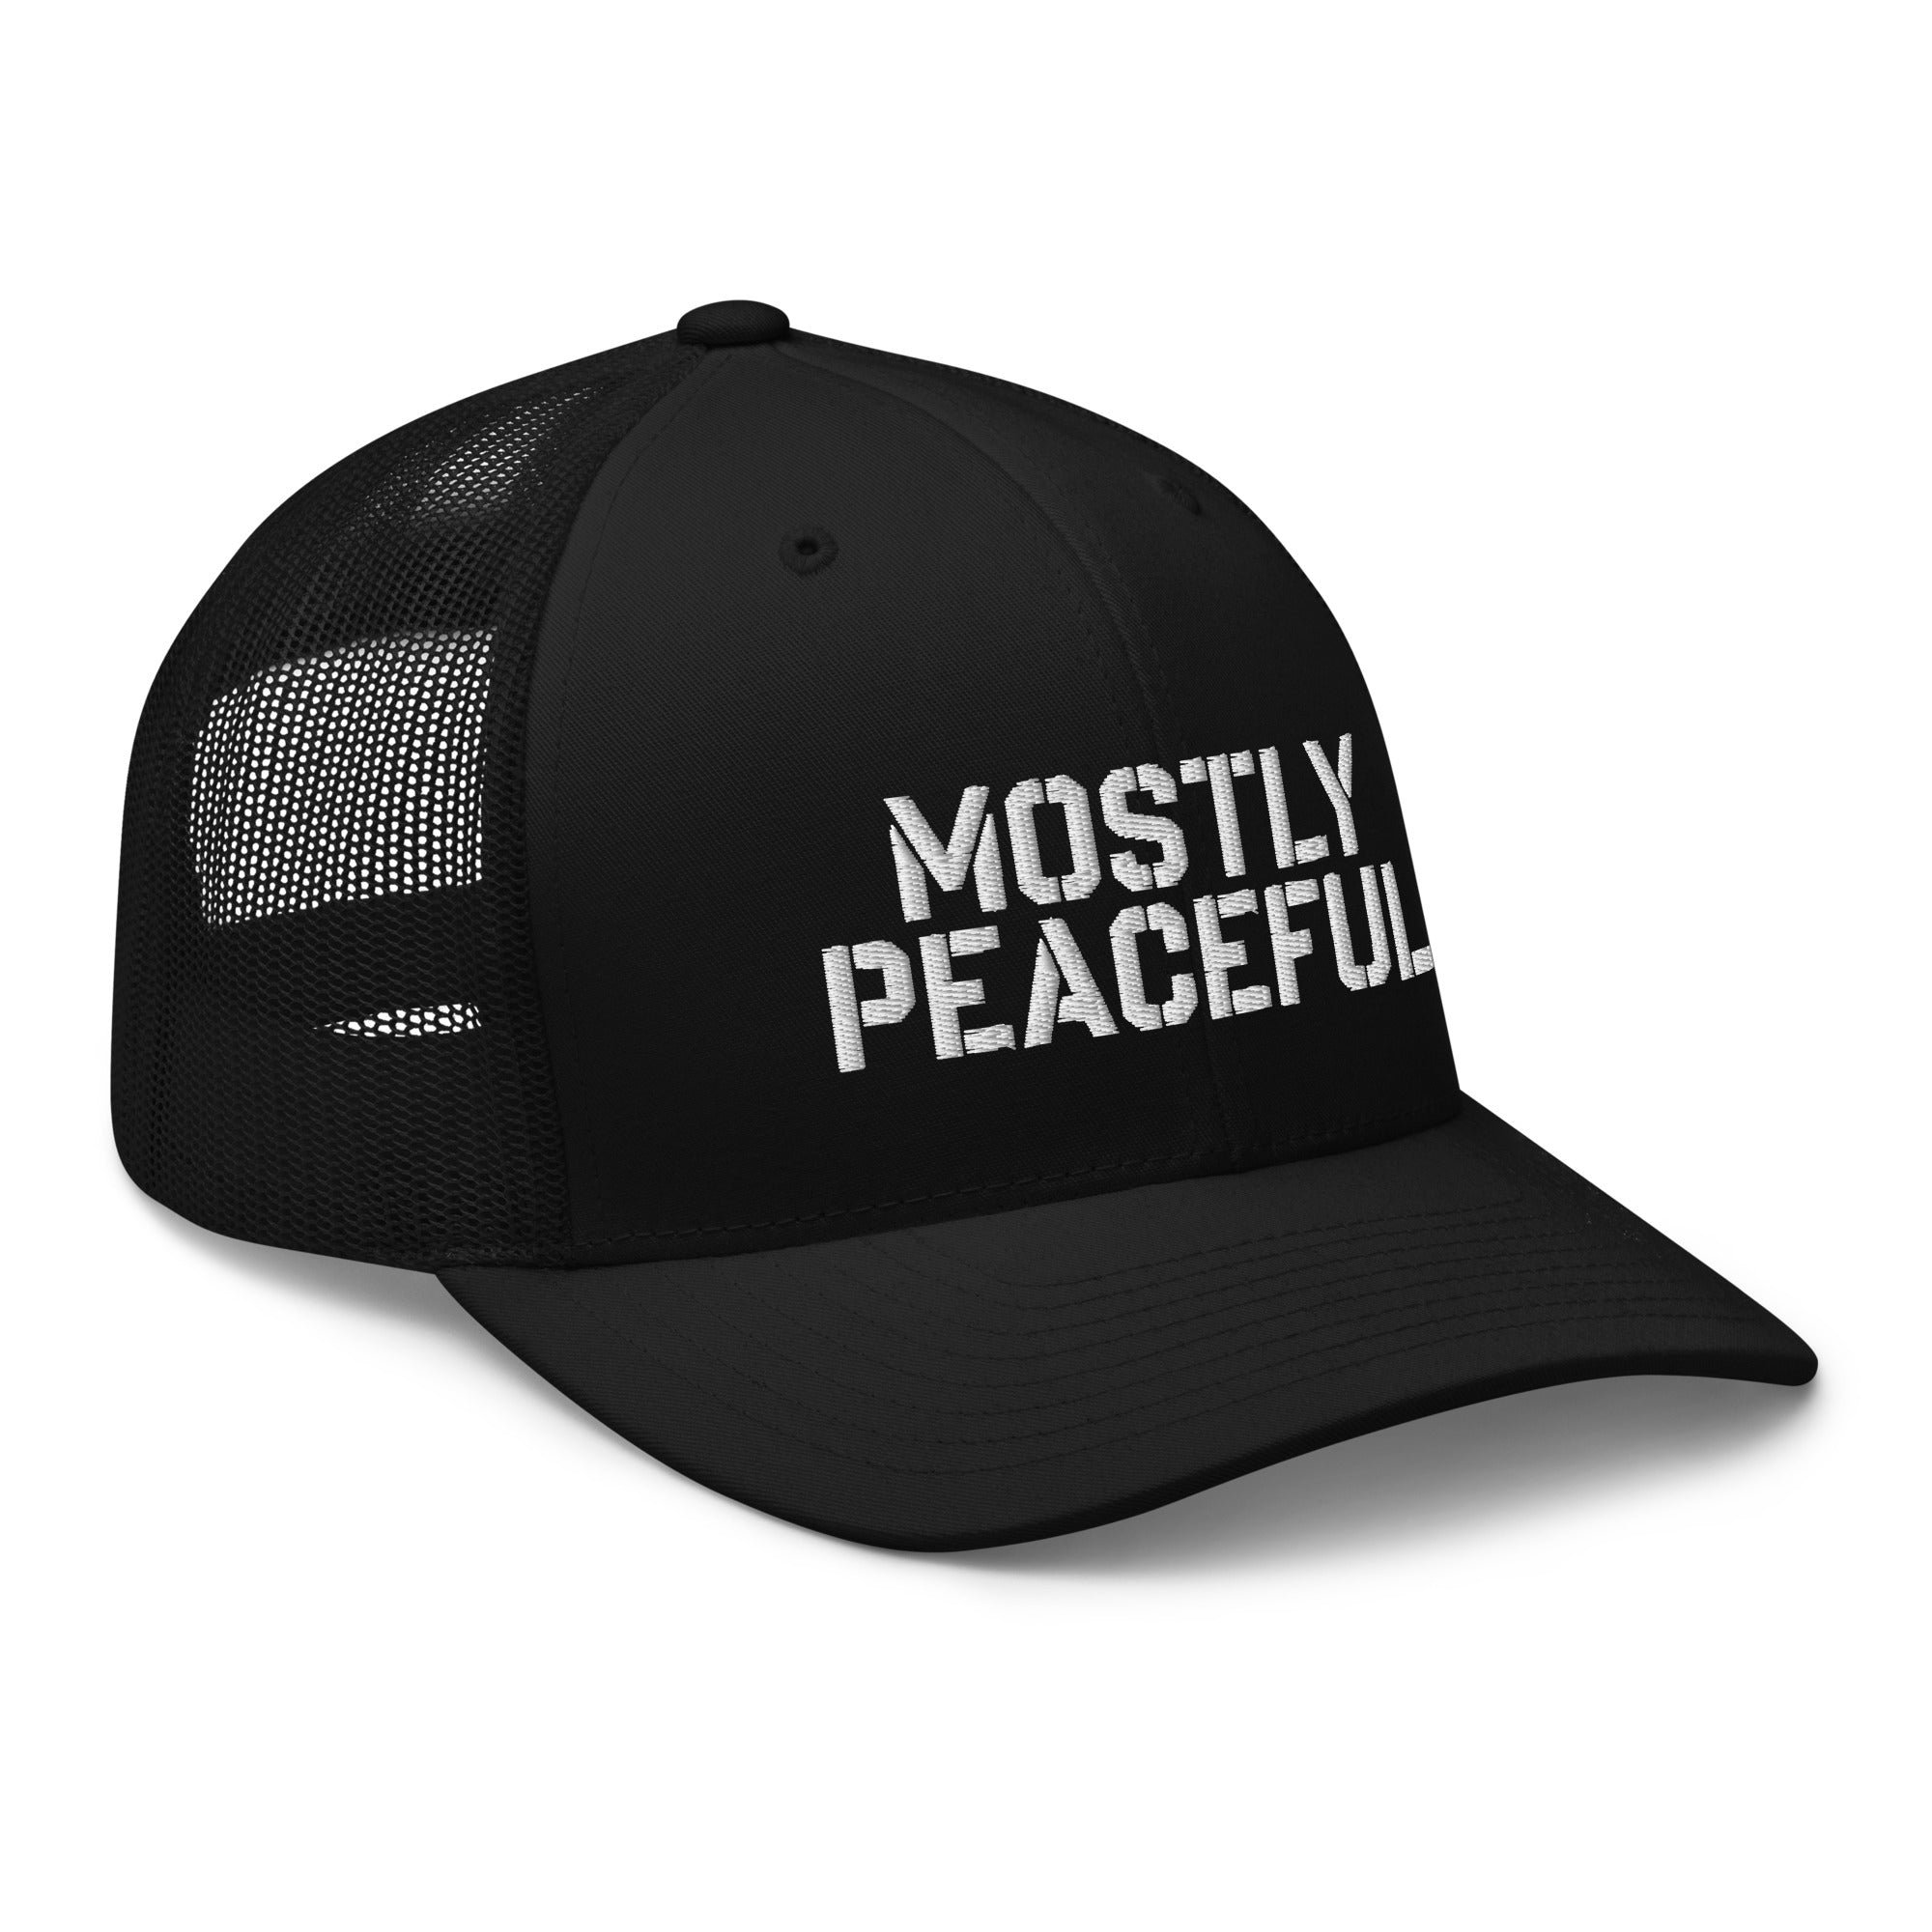 Mostly Peaceful Trucker Cap